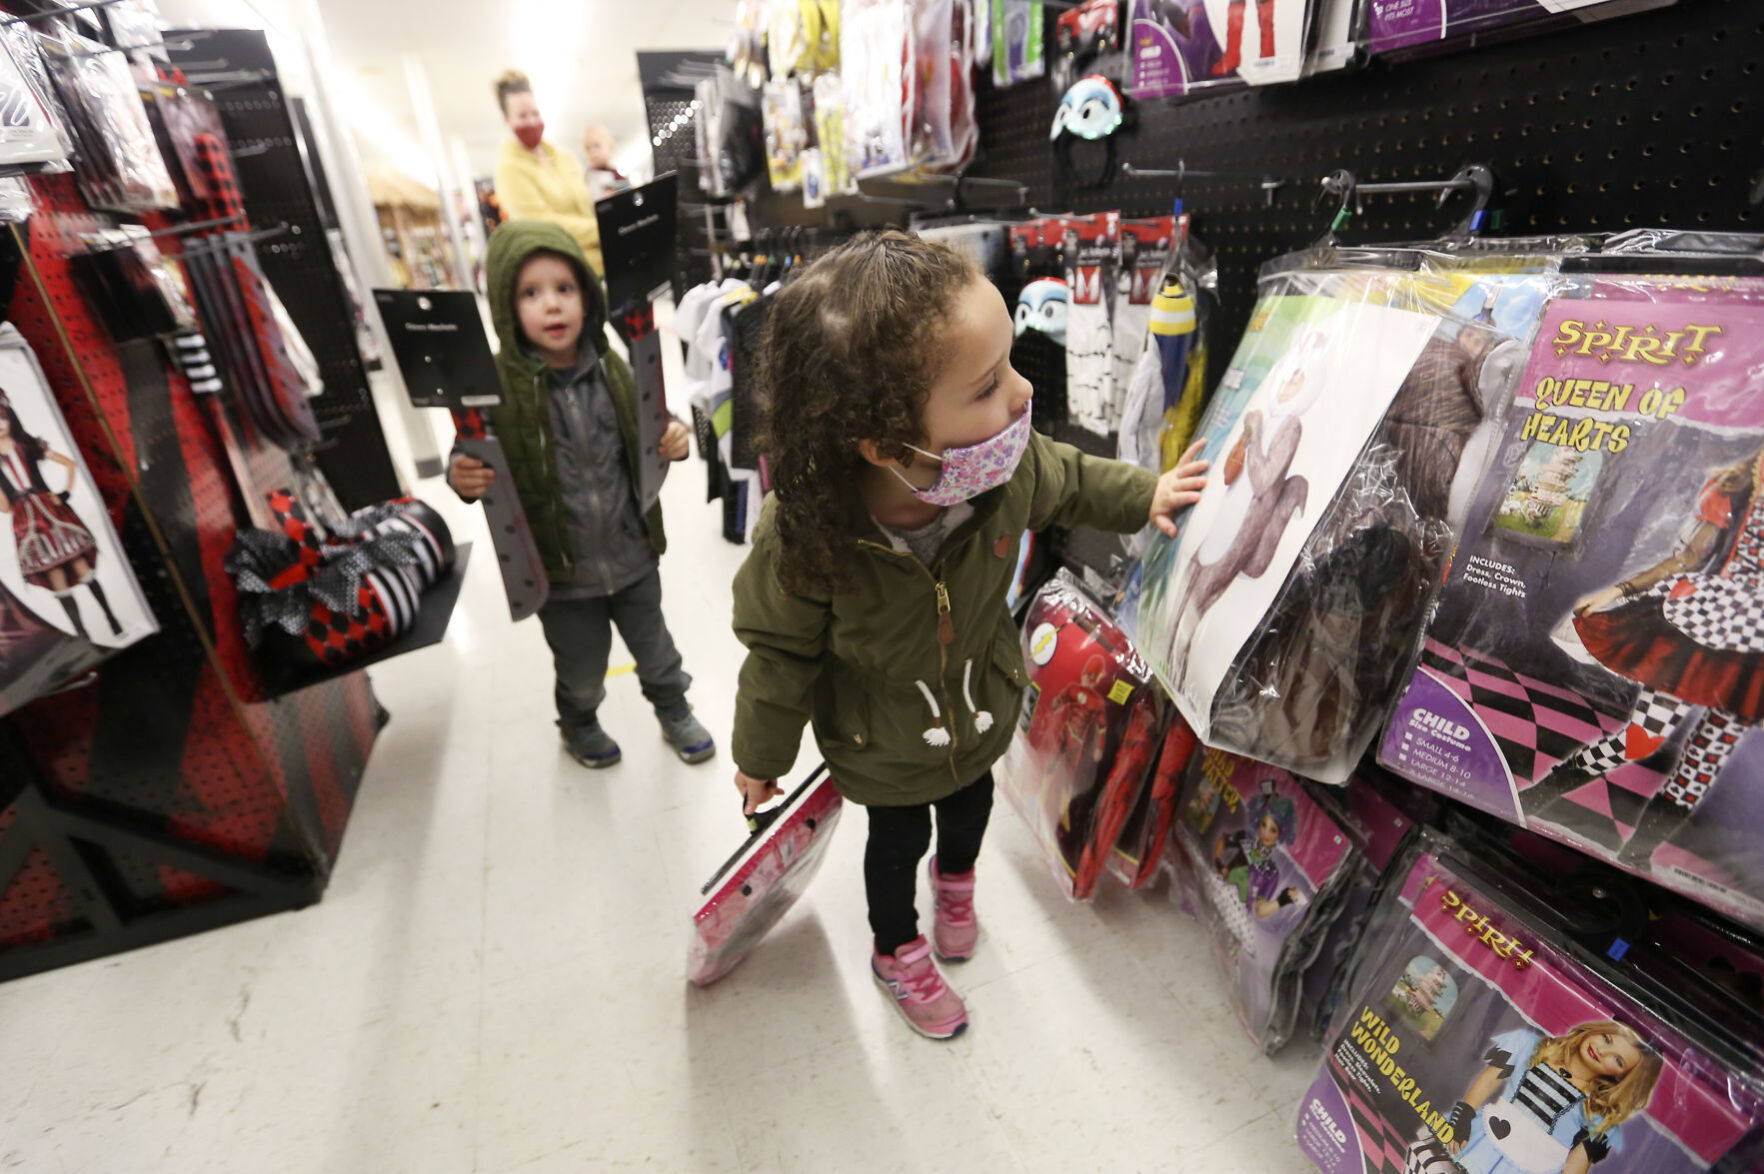 Evelyn Johnson, 3, of Dyersville, Iowa, browses costumes at Spirit Halloween in Dubuque on Tuesday, Oct. 20, 2020. PHOTO CREDIT: NICKI KOHL